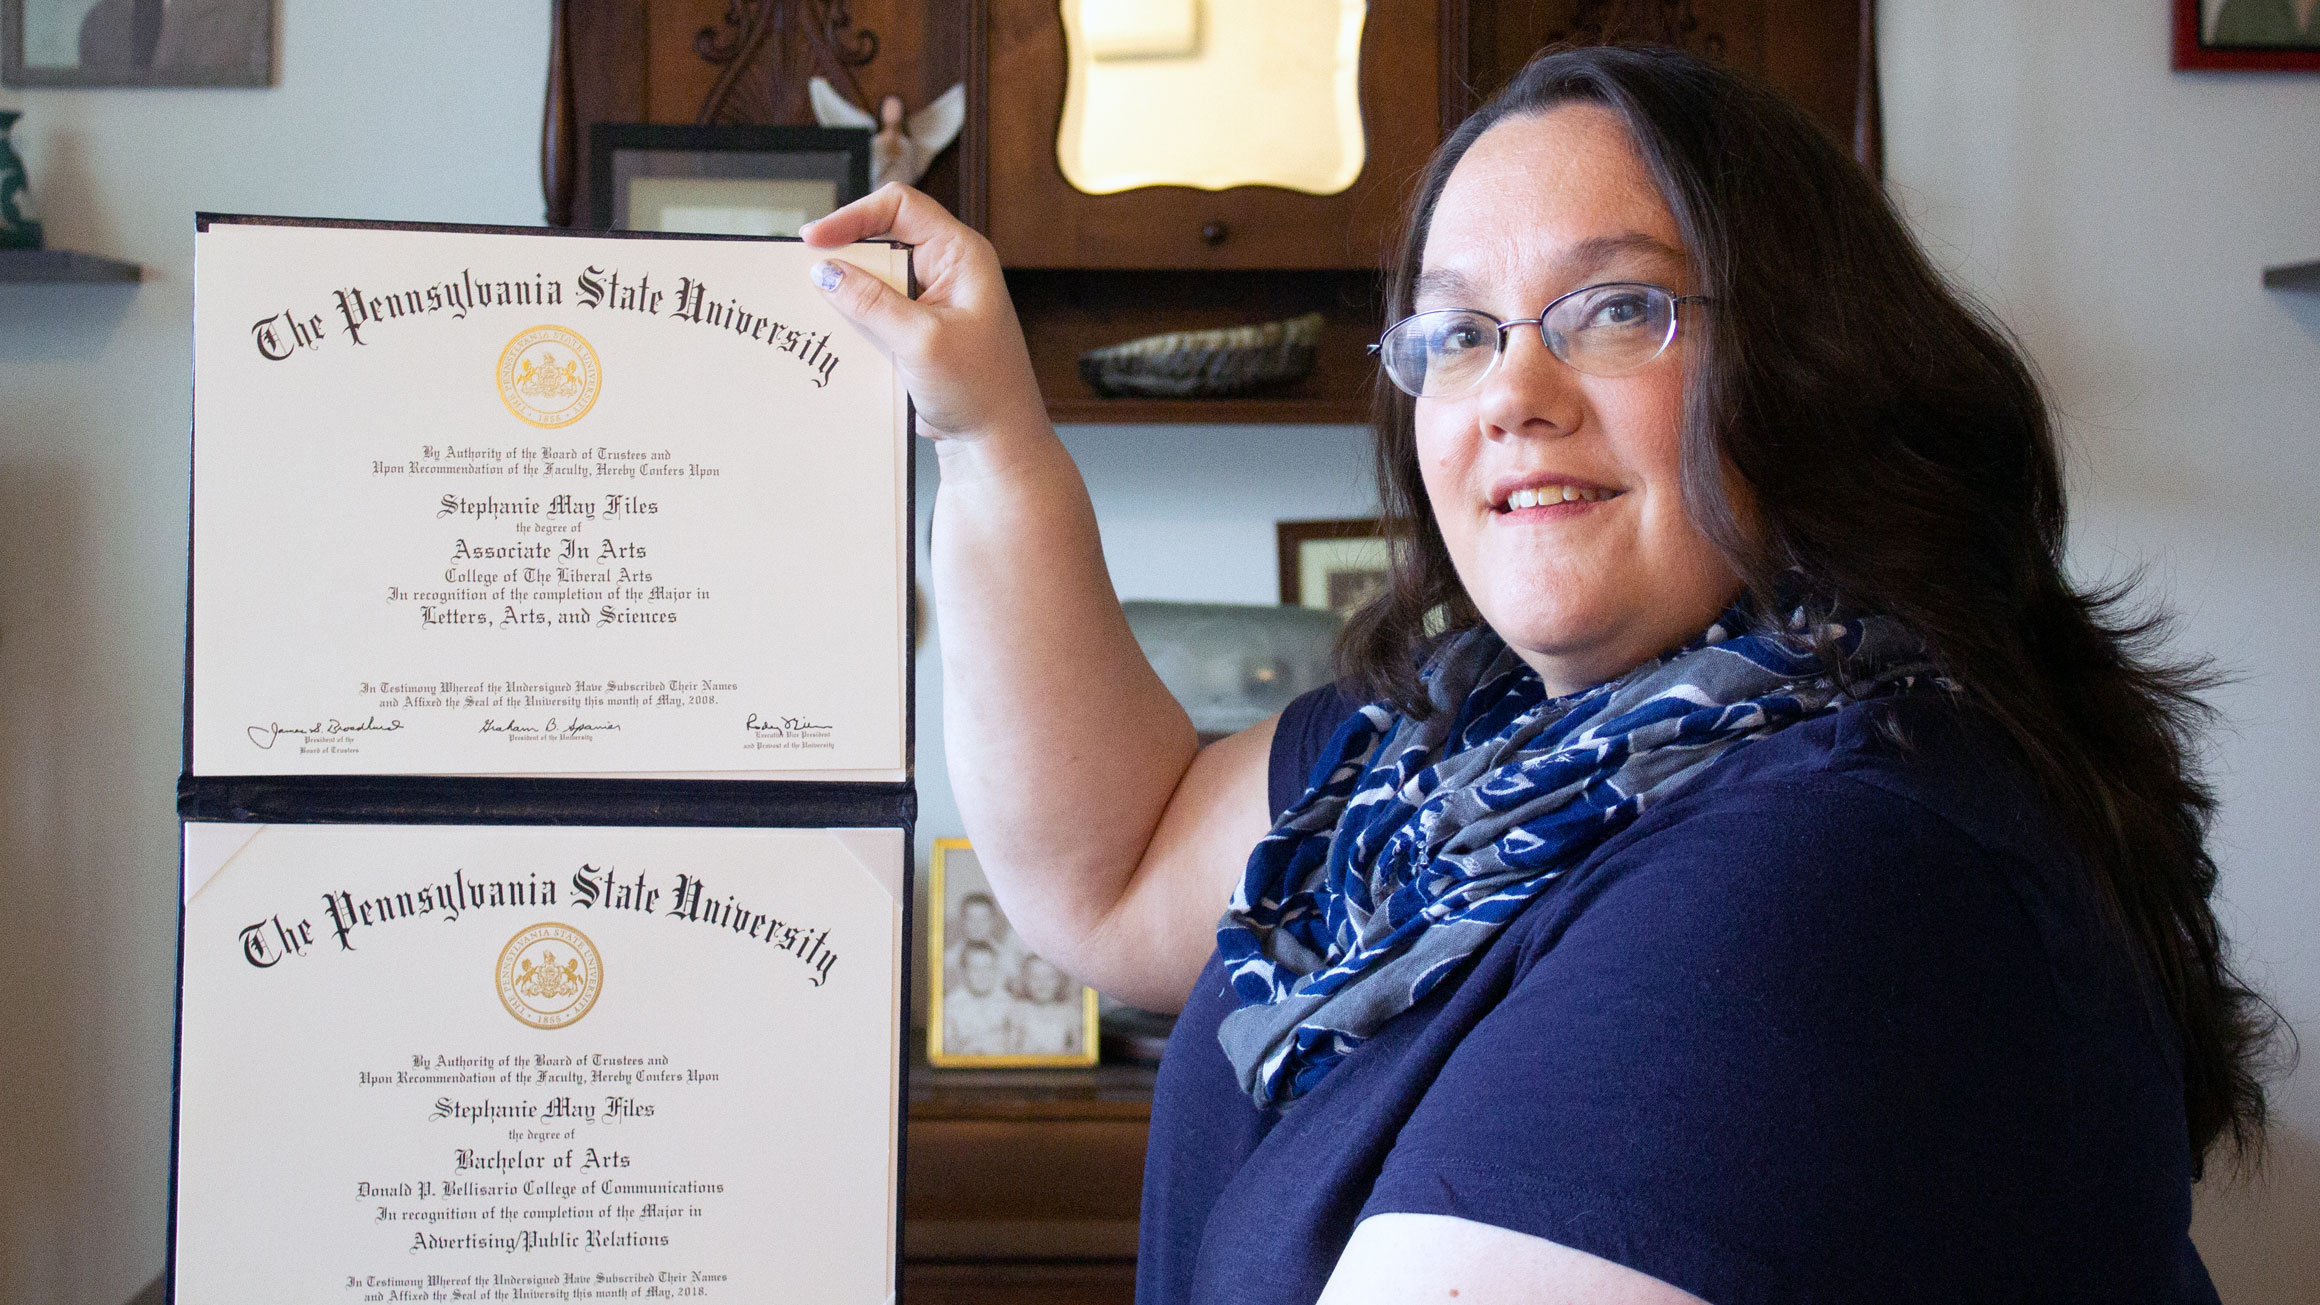 Stephanie Files displays two diplomas in her hands